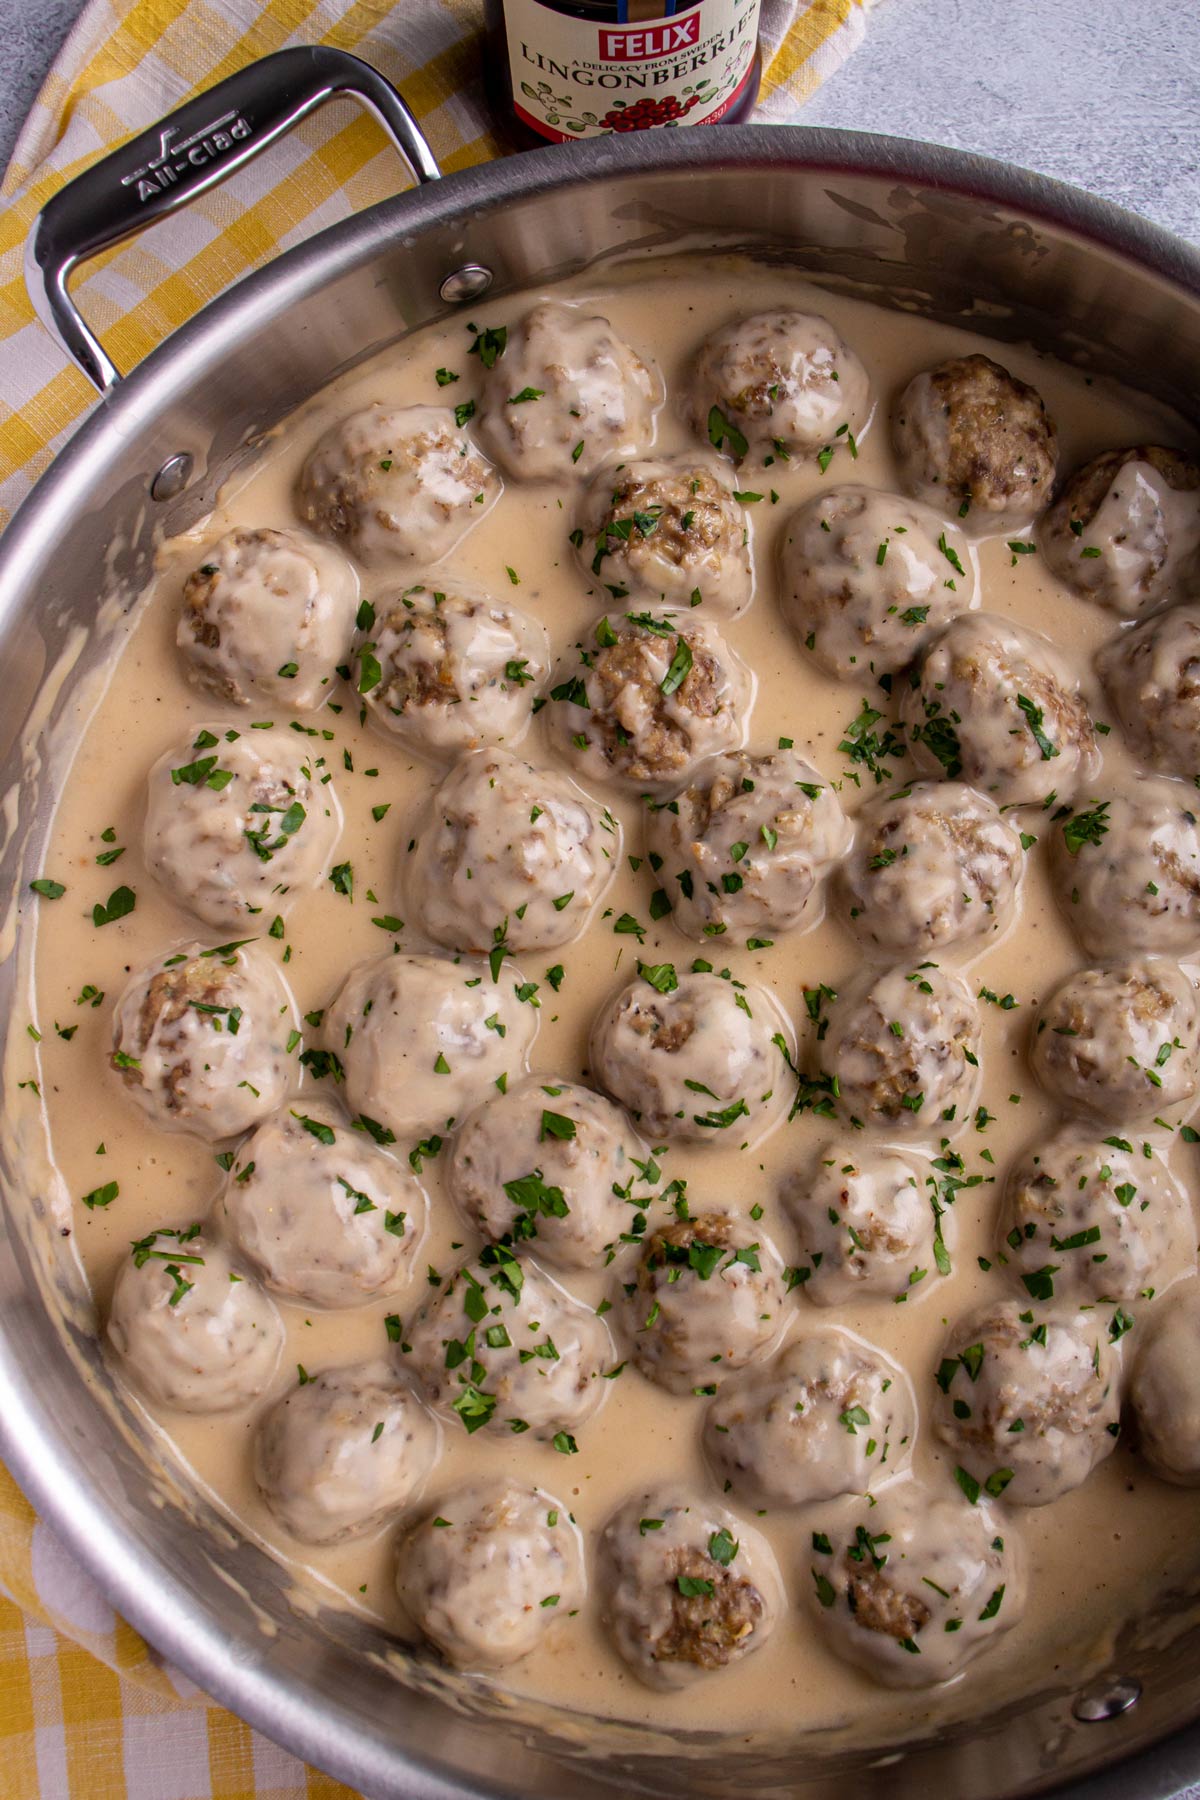 Swedish meatballs in creamy gravy topped with chopped parsley in a stainless steel skillet.